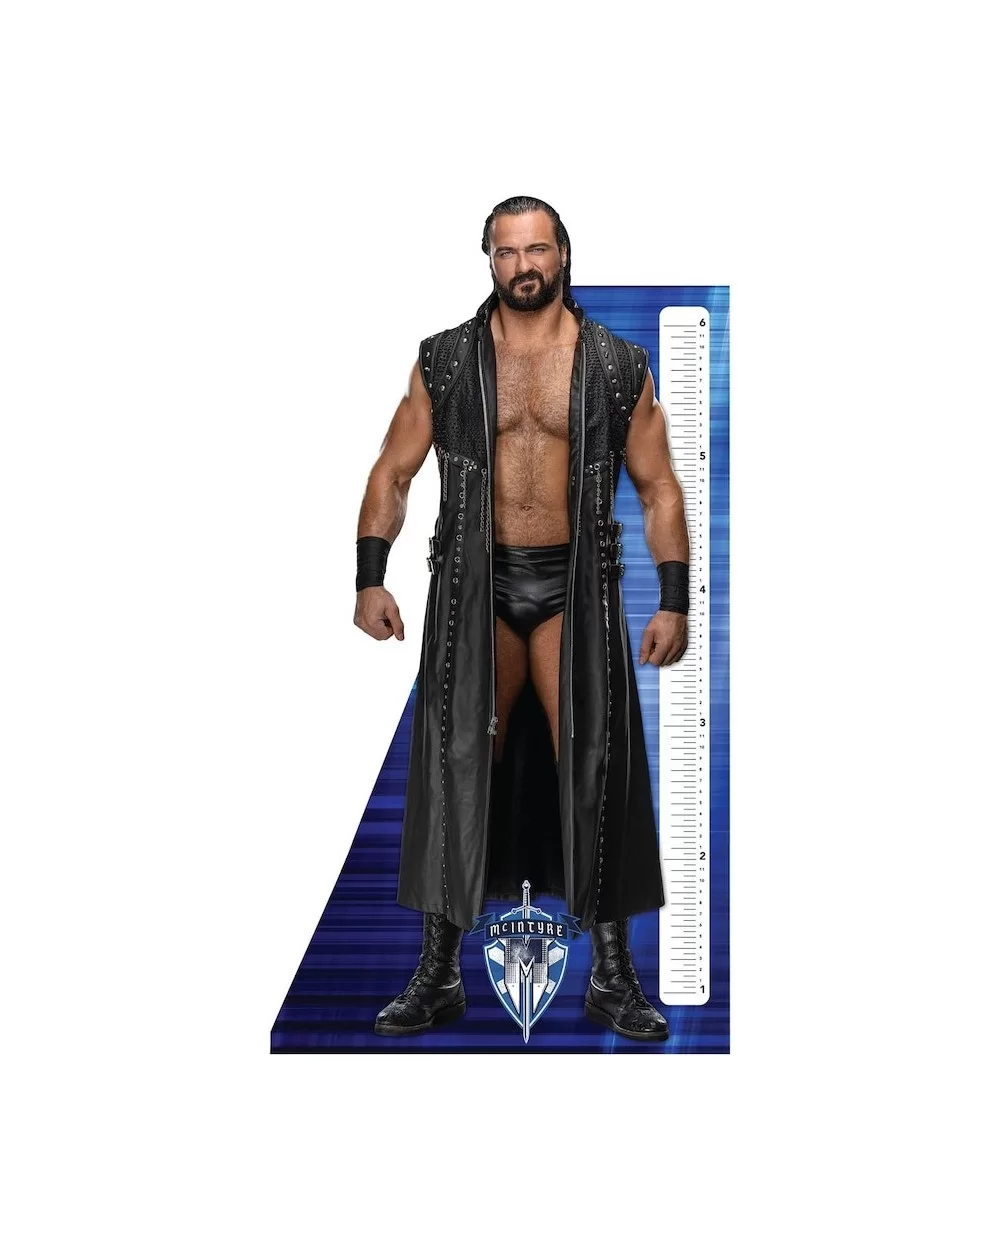 Fathead Drew McIntyre Removable Growth Chart Decal $34.04 Home & Office